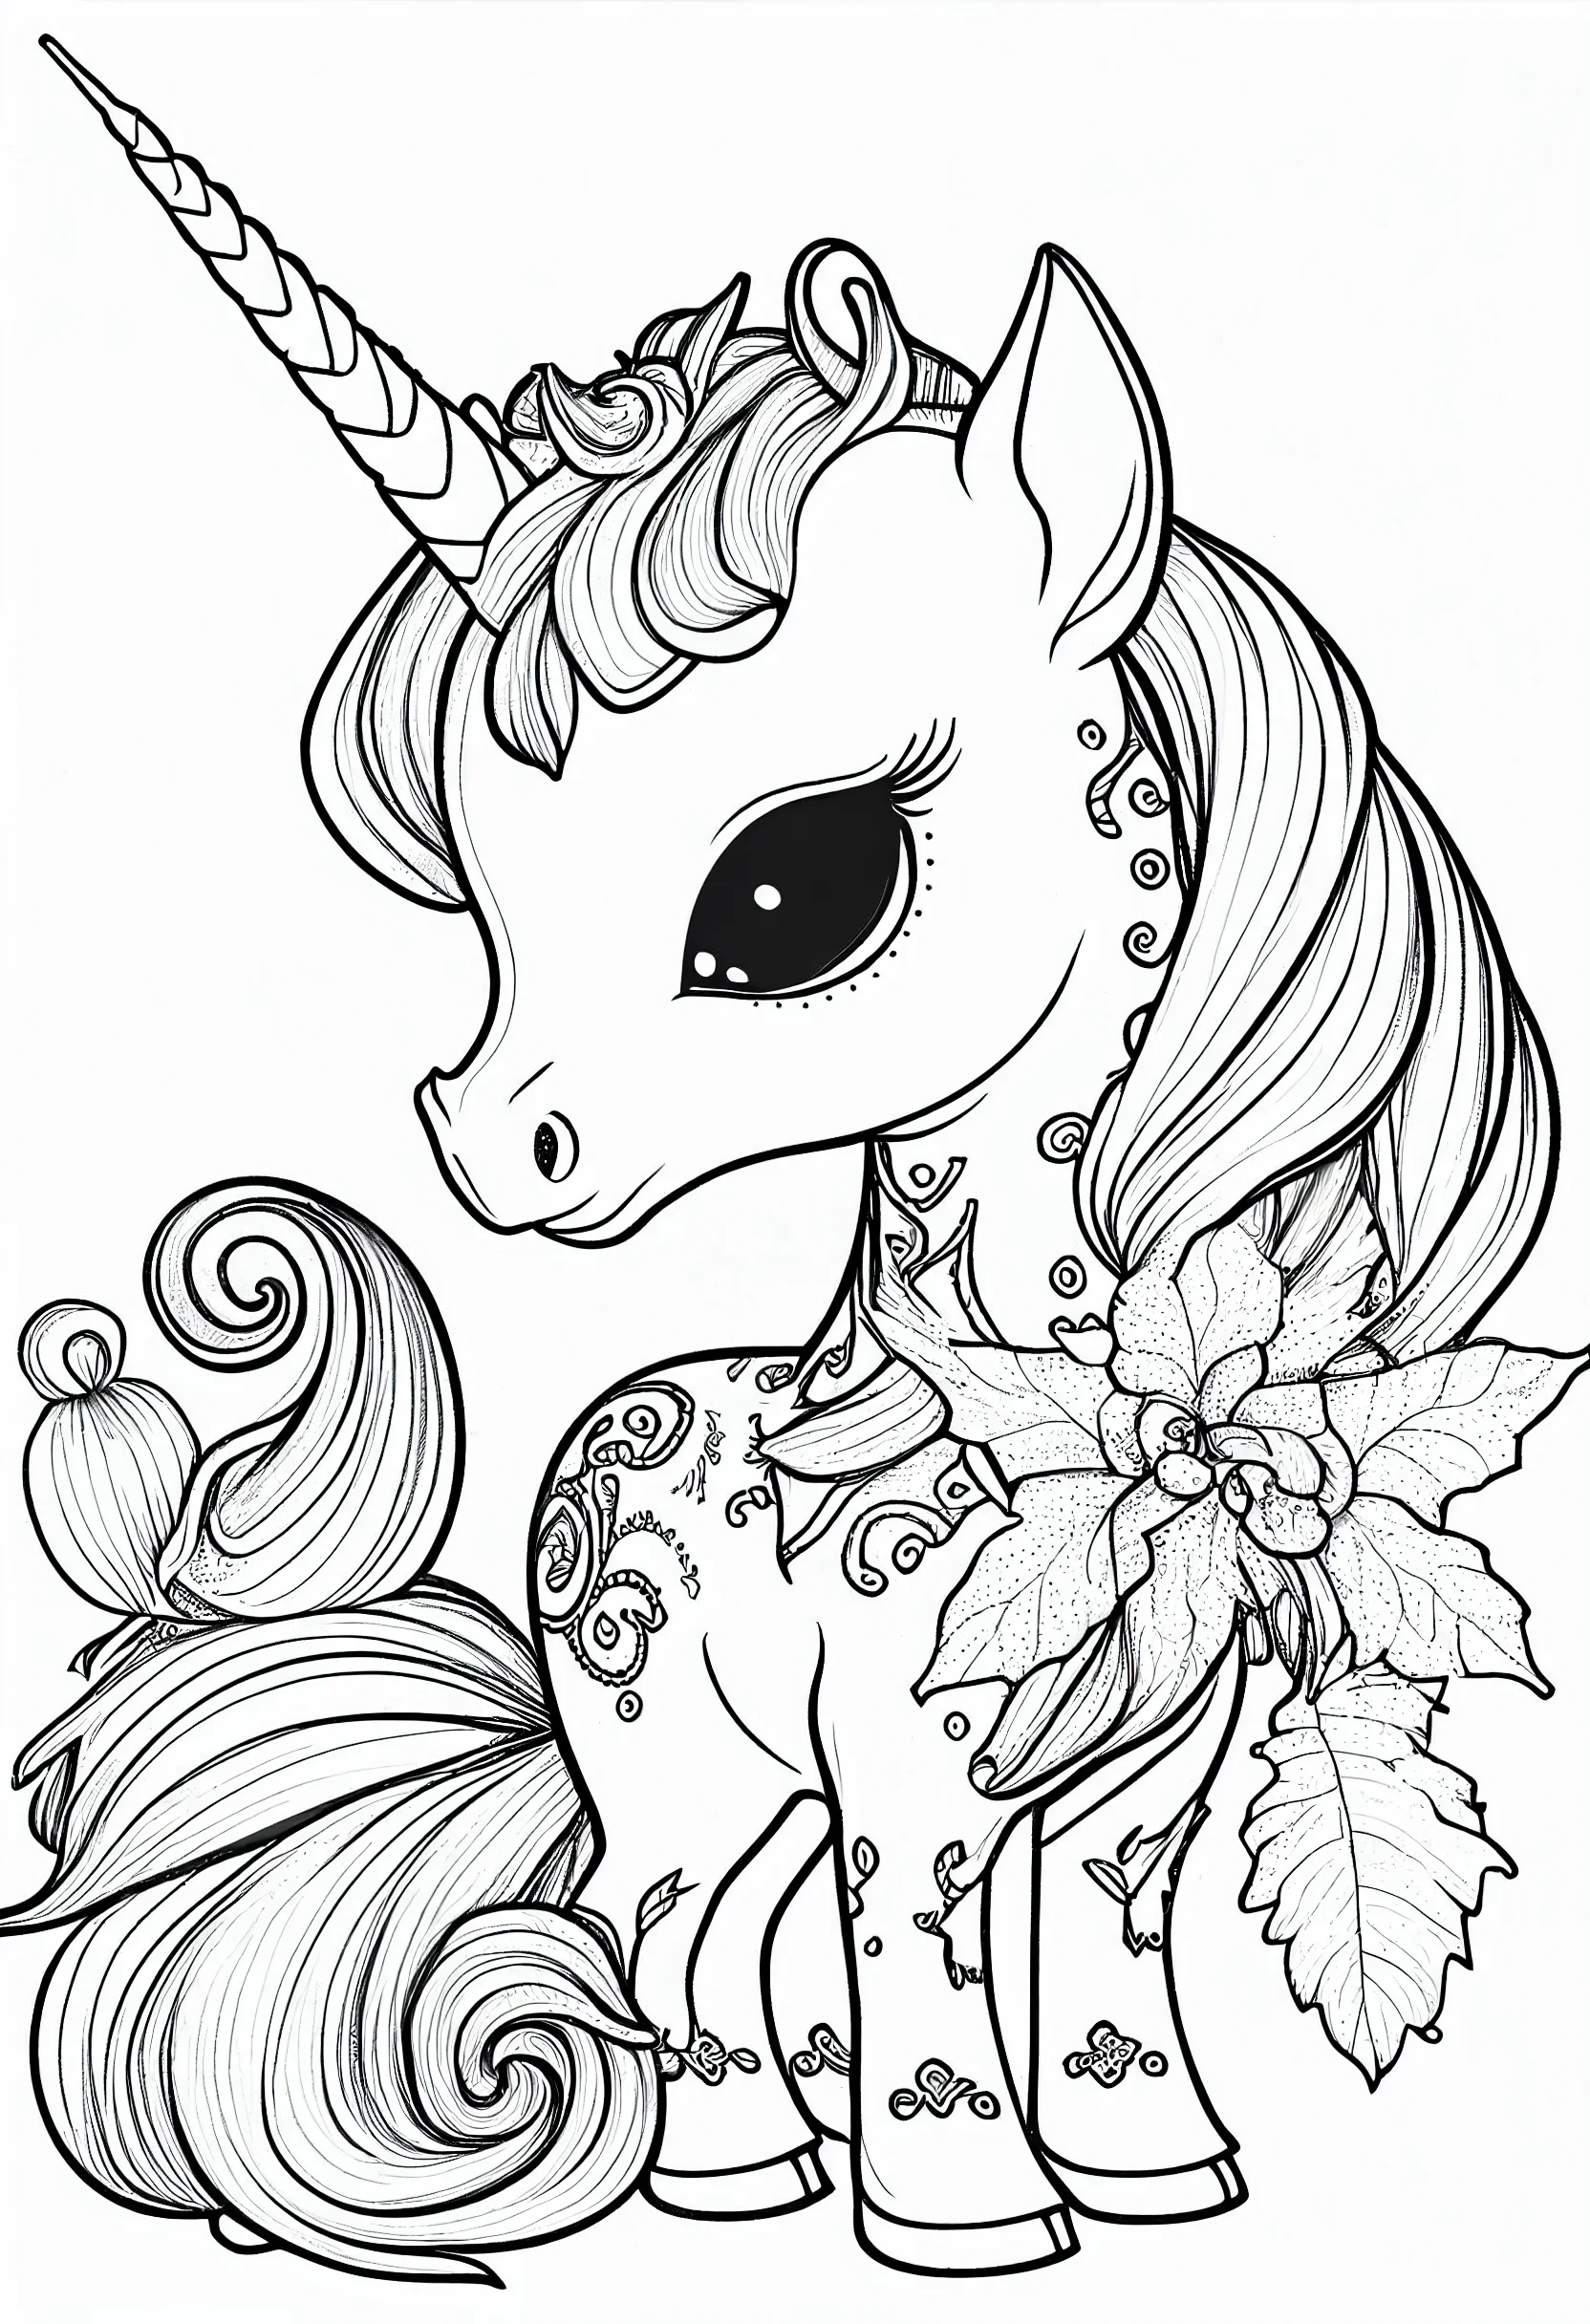 Unicorn cute coloring pages